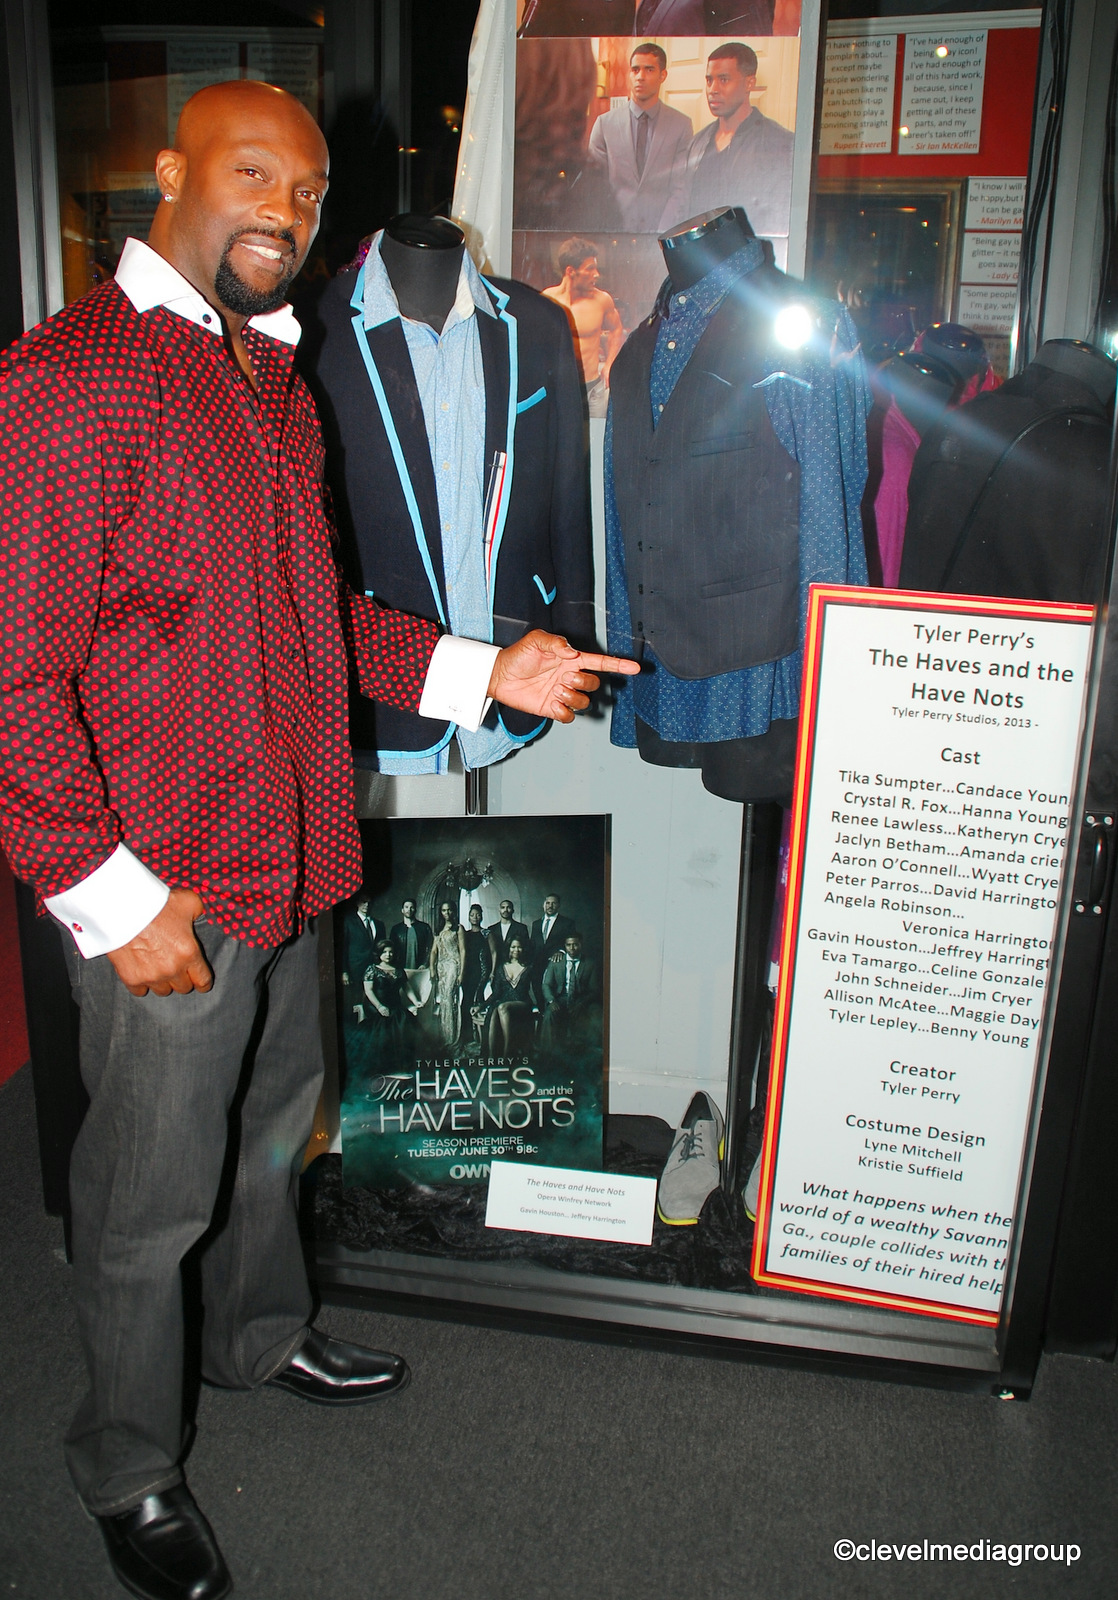 Ro Brooks- The Haves and the Have Nots Exhibit in The Hollywood Museum. #WeInThere